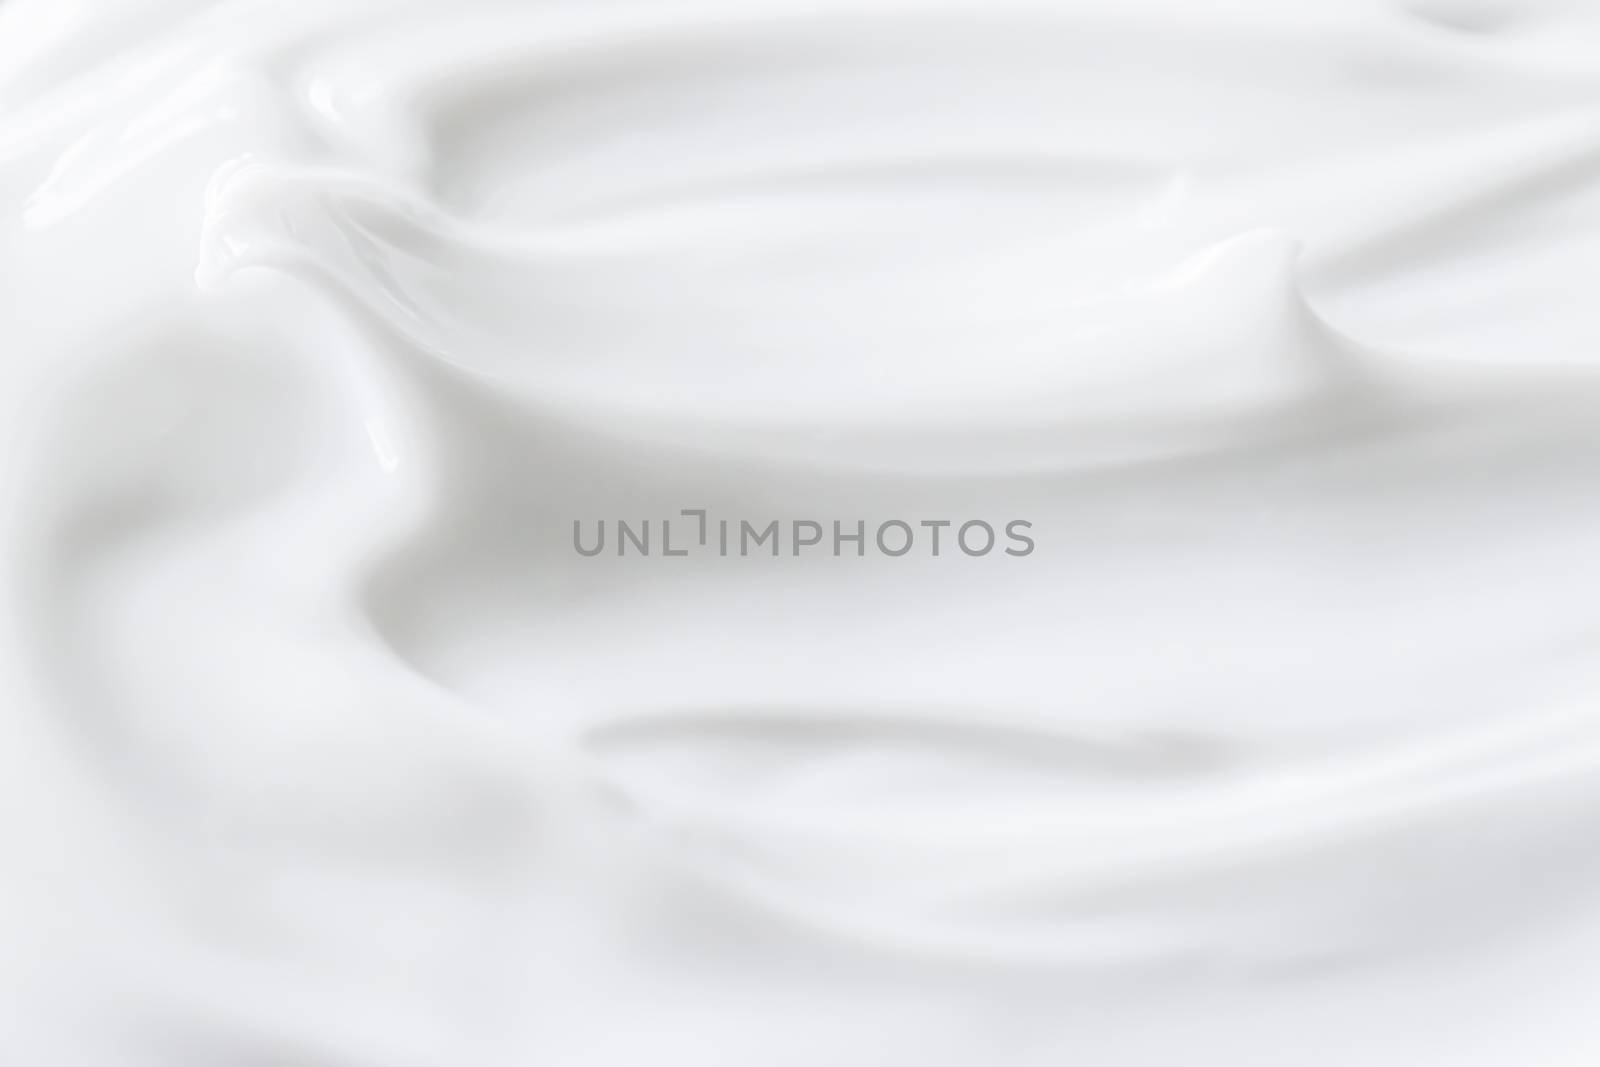 Pure white cream texture as abstract background, food substance or organic cosmetic by Anneleven